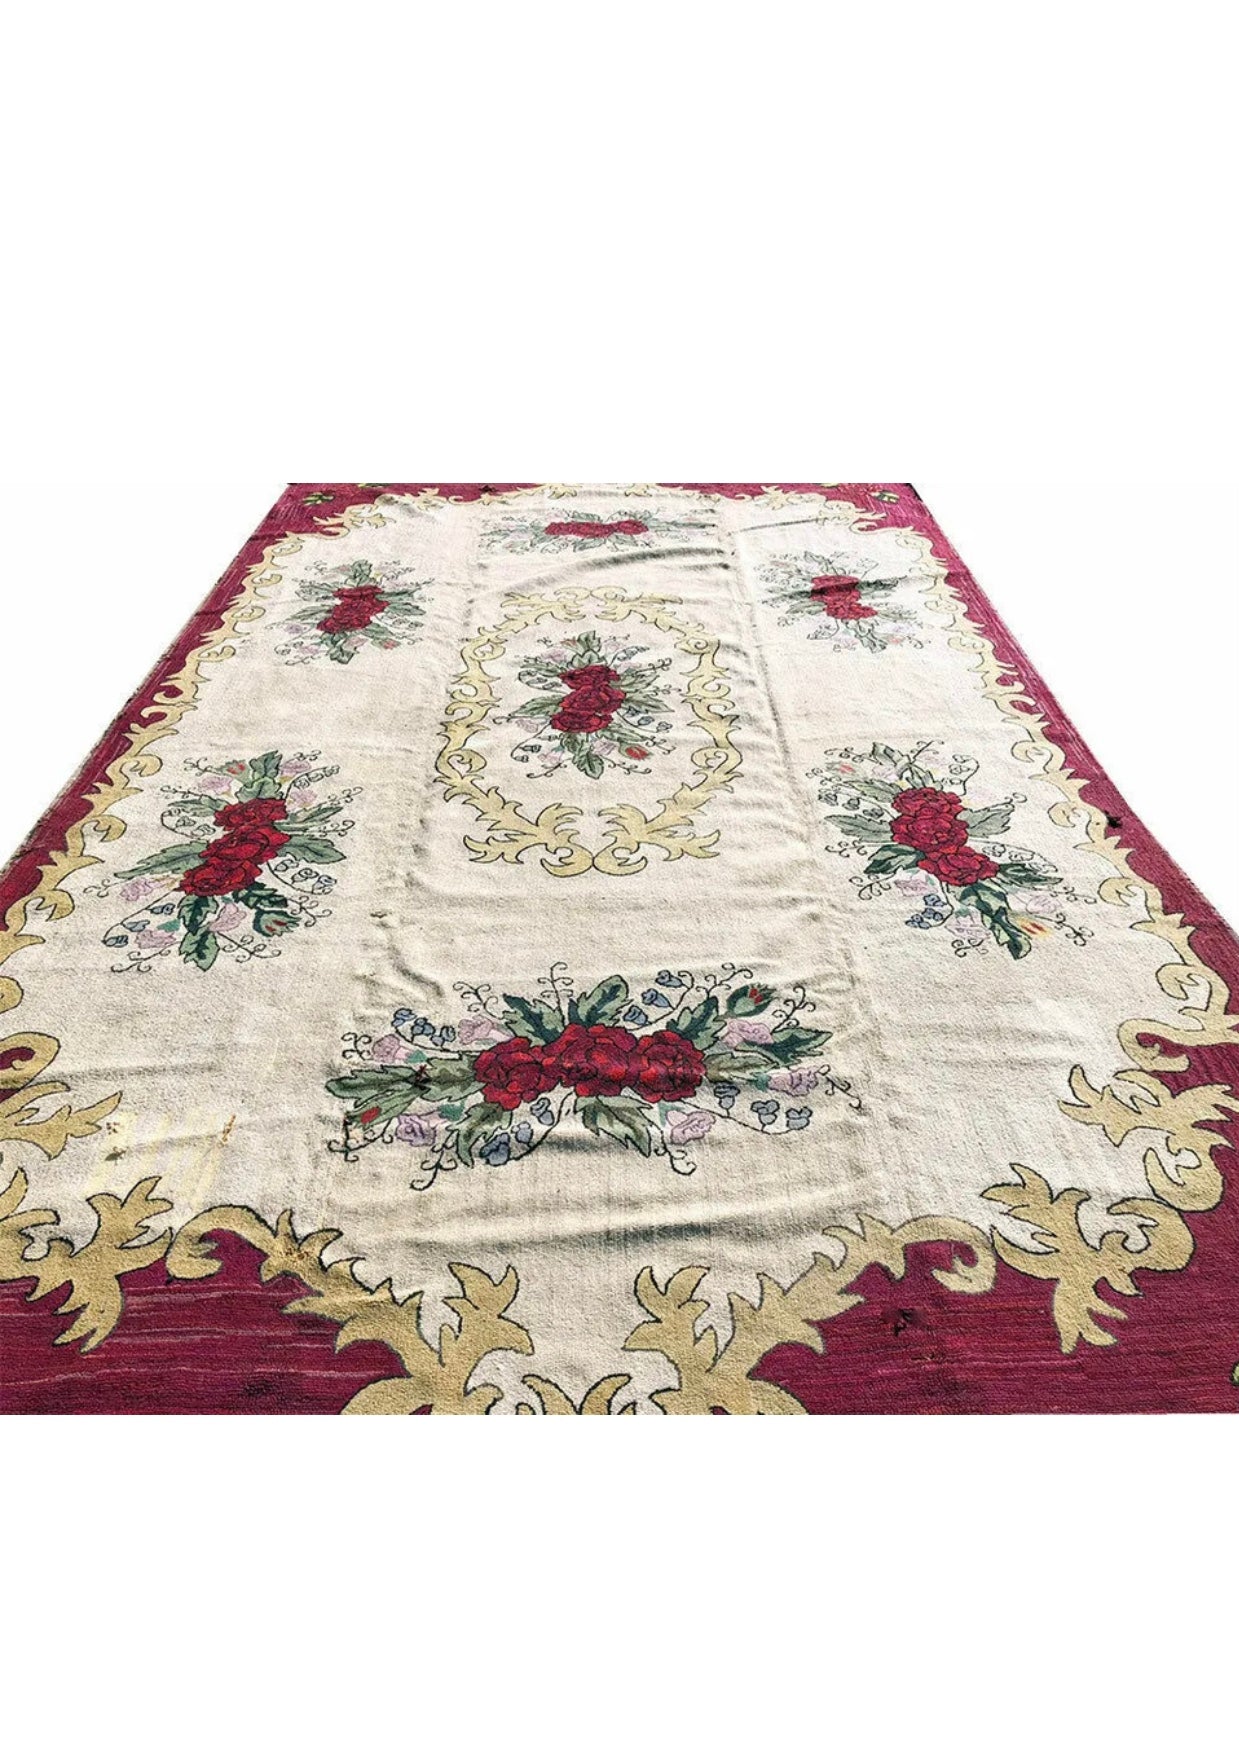 Antique Rate Palace Size 10’ x 15’ American Hooked Rug